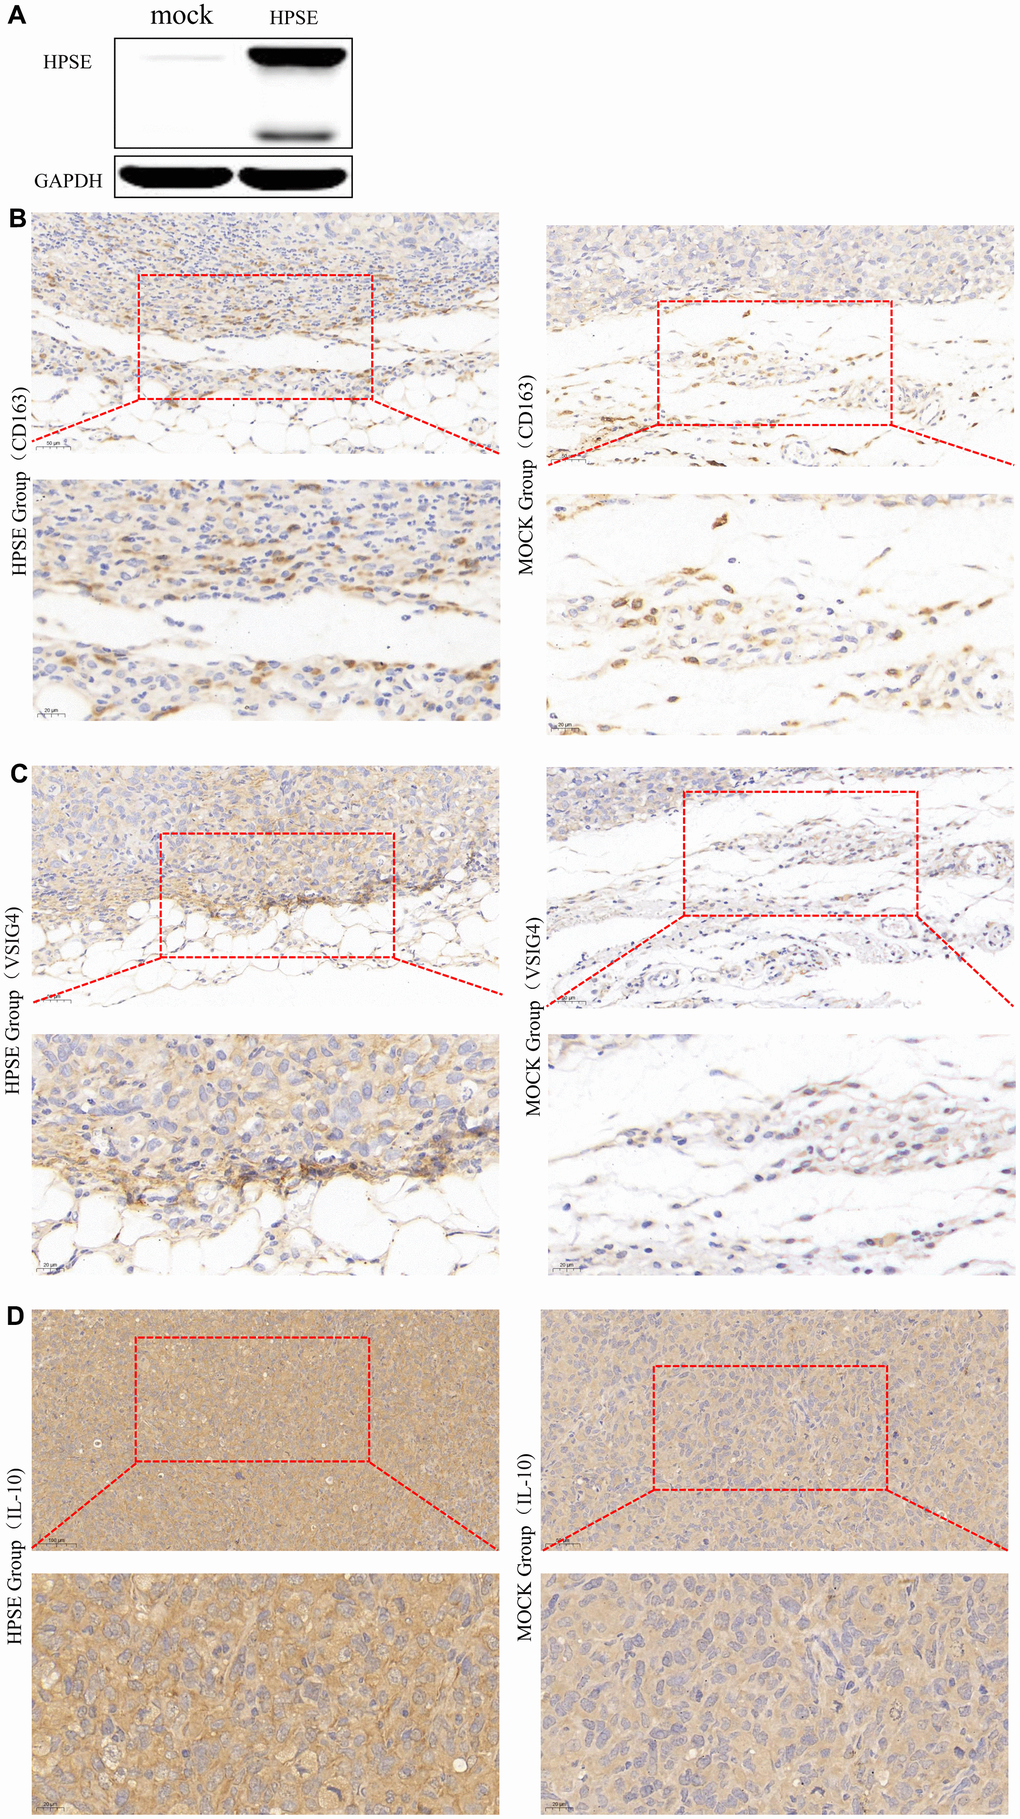 HPSE expression between MDA-MB-231-HPSE and MDA-MB-231-mock cells (A). HPSE expression correlates with IL-10 induced M2 macrophage polarization in a mouse breast tumor model: IHC staining of (B) CD163, (C) VSIG4, and (D) IL-10.